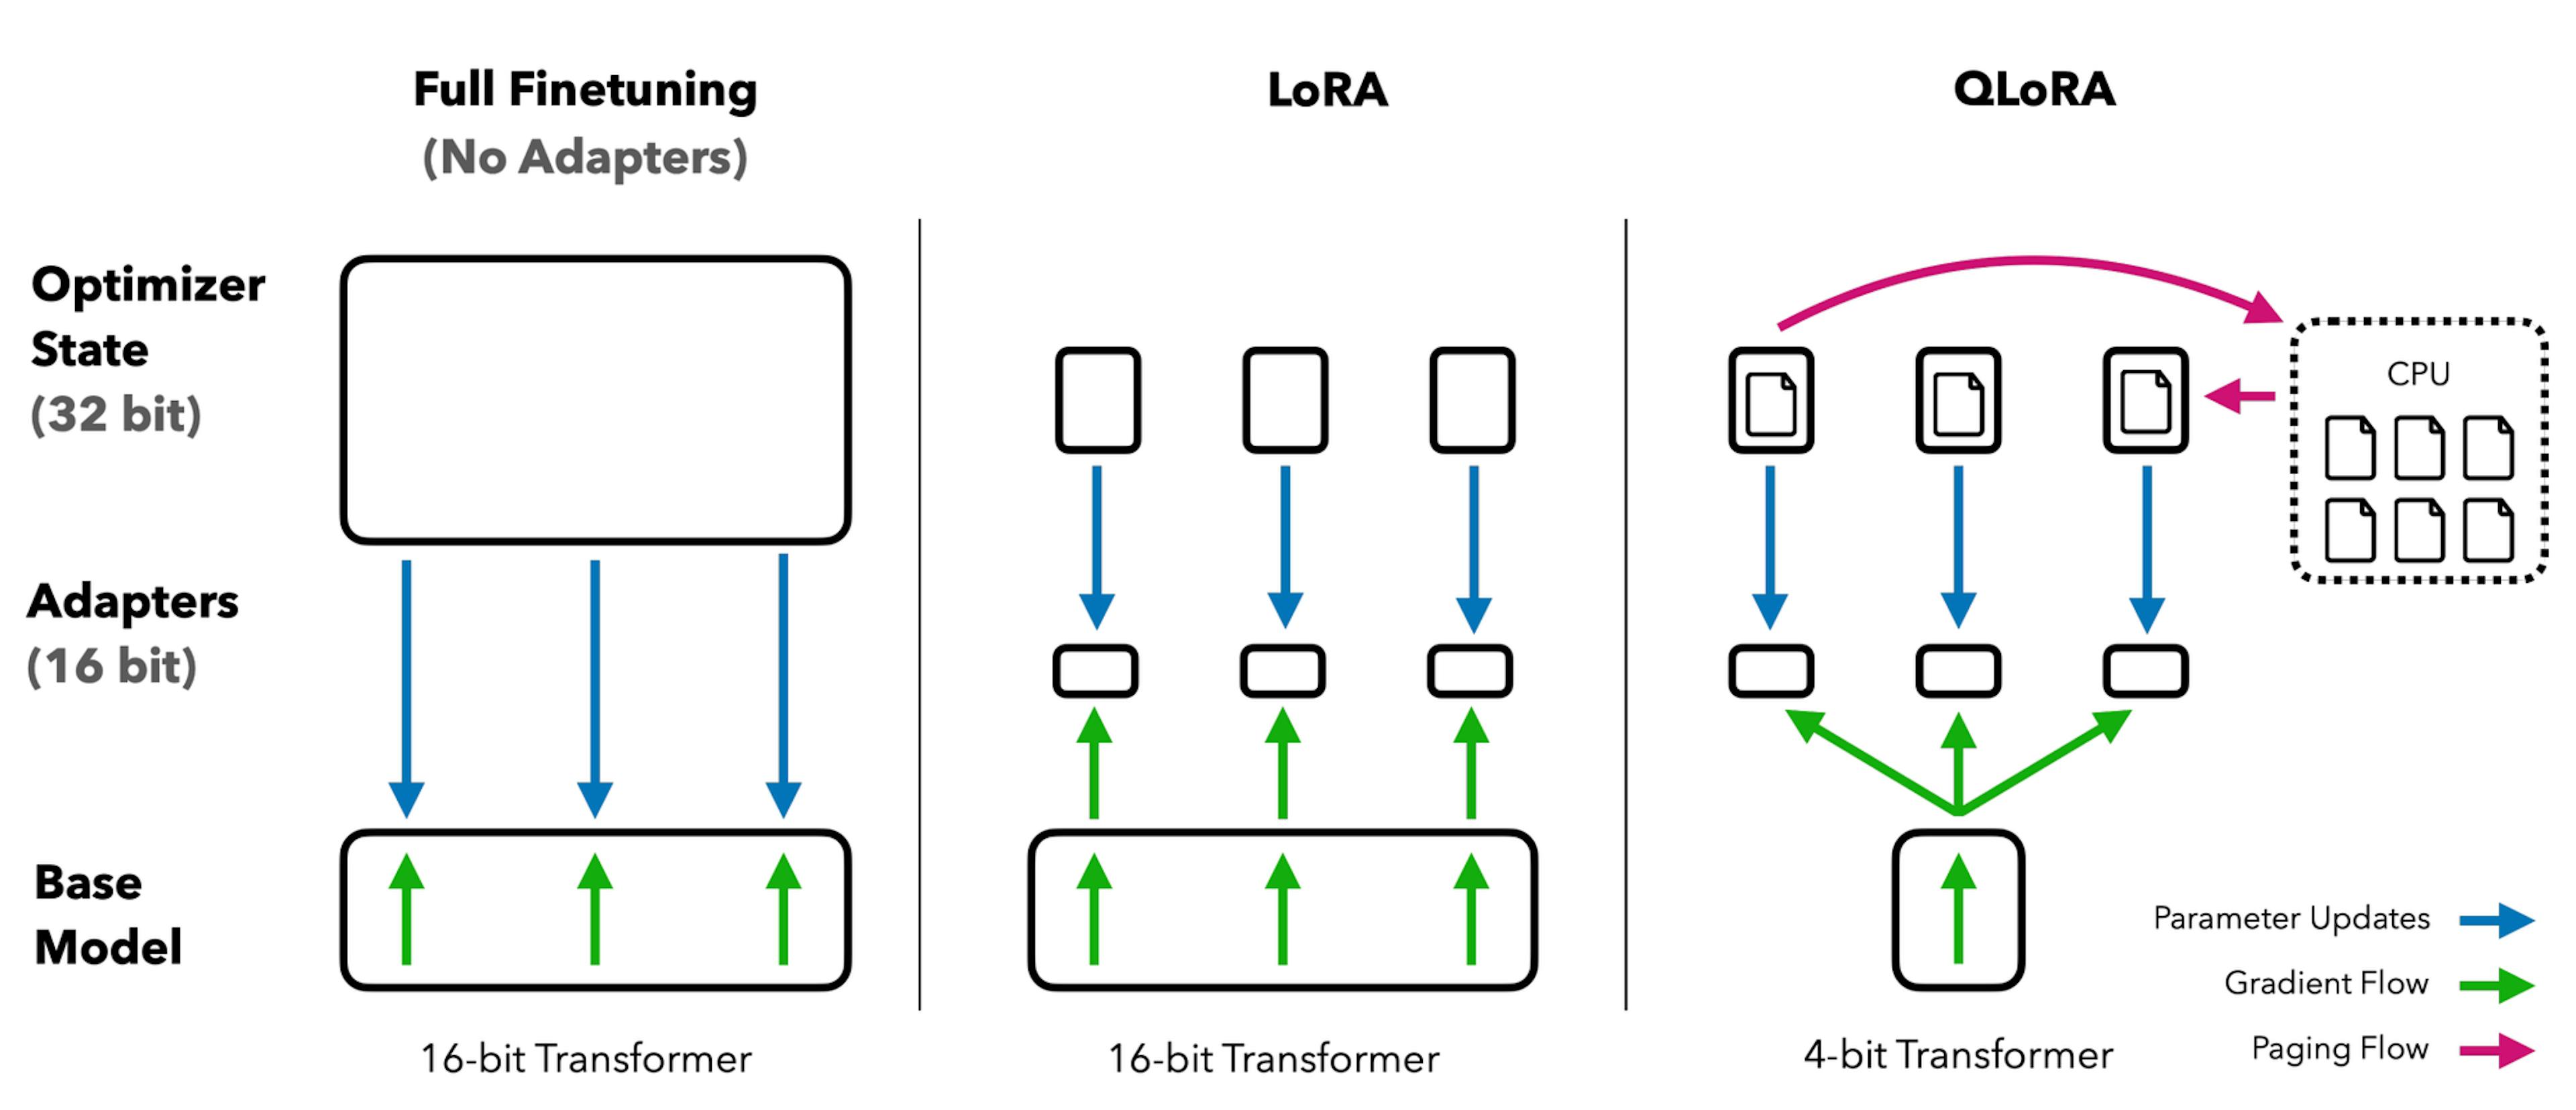 QLORA improves over LoRA by quantizing the transformer model to 4-bit precision and using paged optimizers to handle memory spikes. - Image from paper: QLoRA (Quantized Low-Rank Adaption)